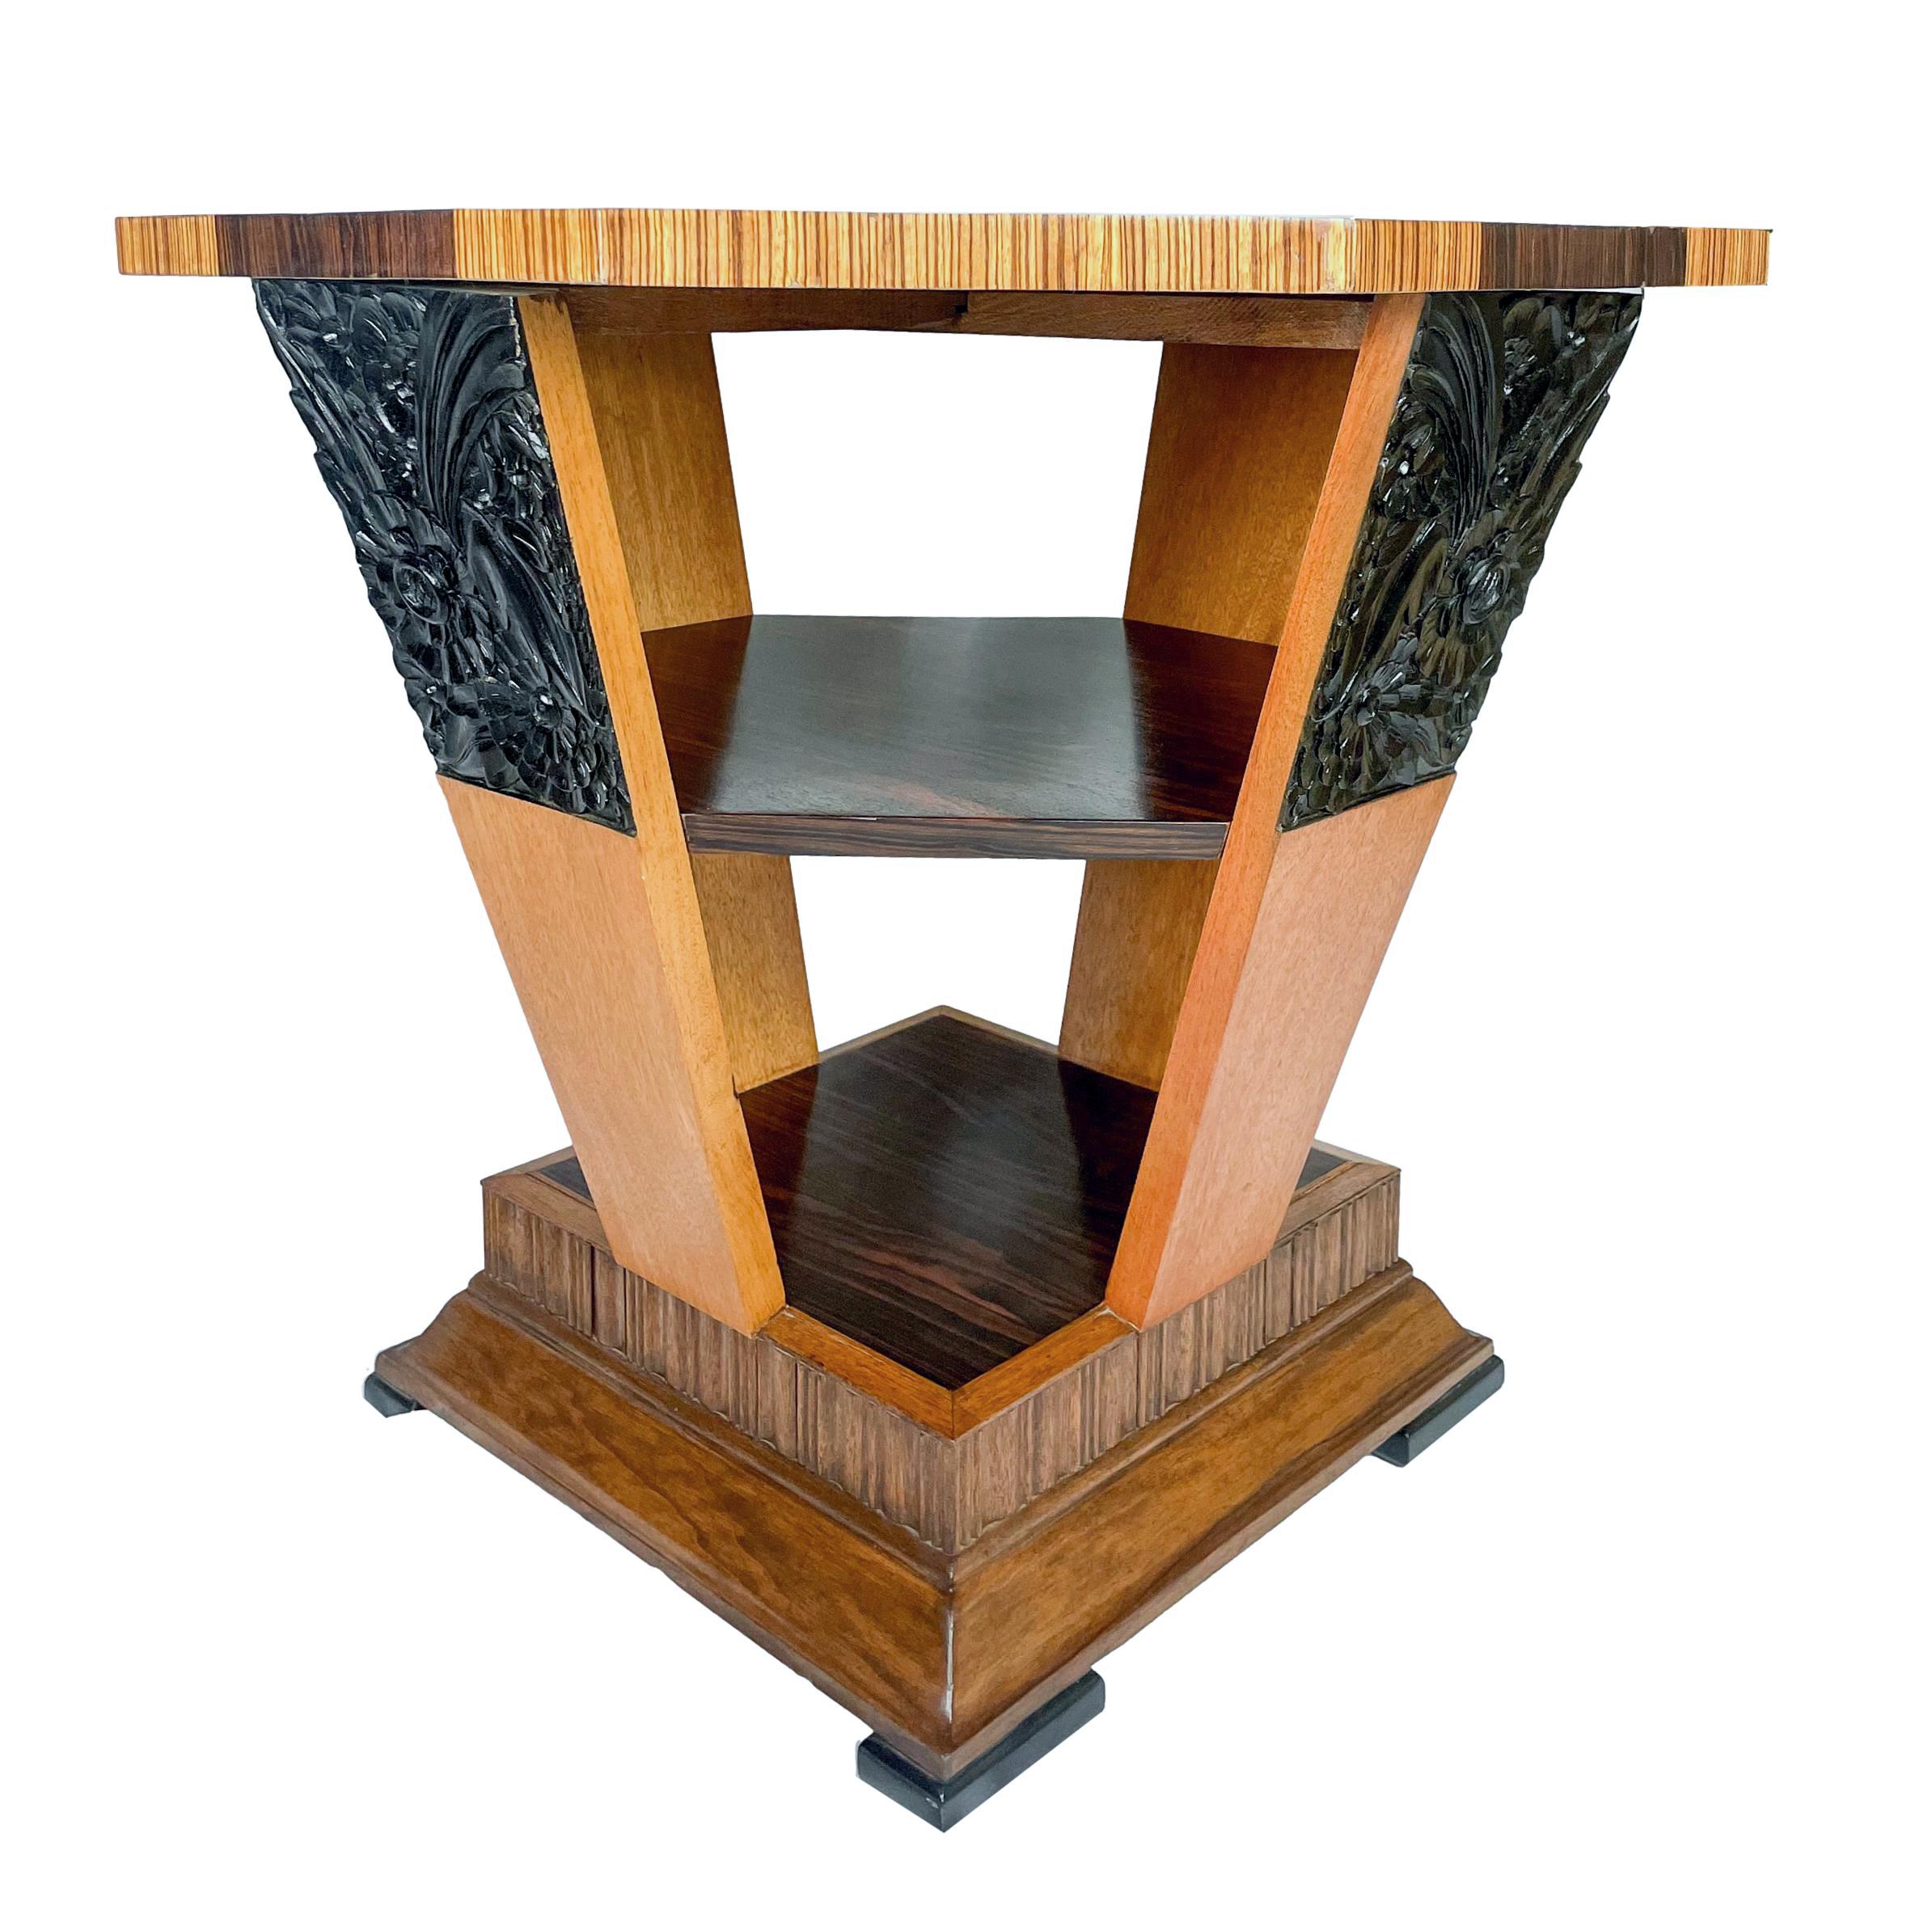 French Hollywood Regency Art Deco Rosewood and Macassar Octagonal Center Table, c. 1930